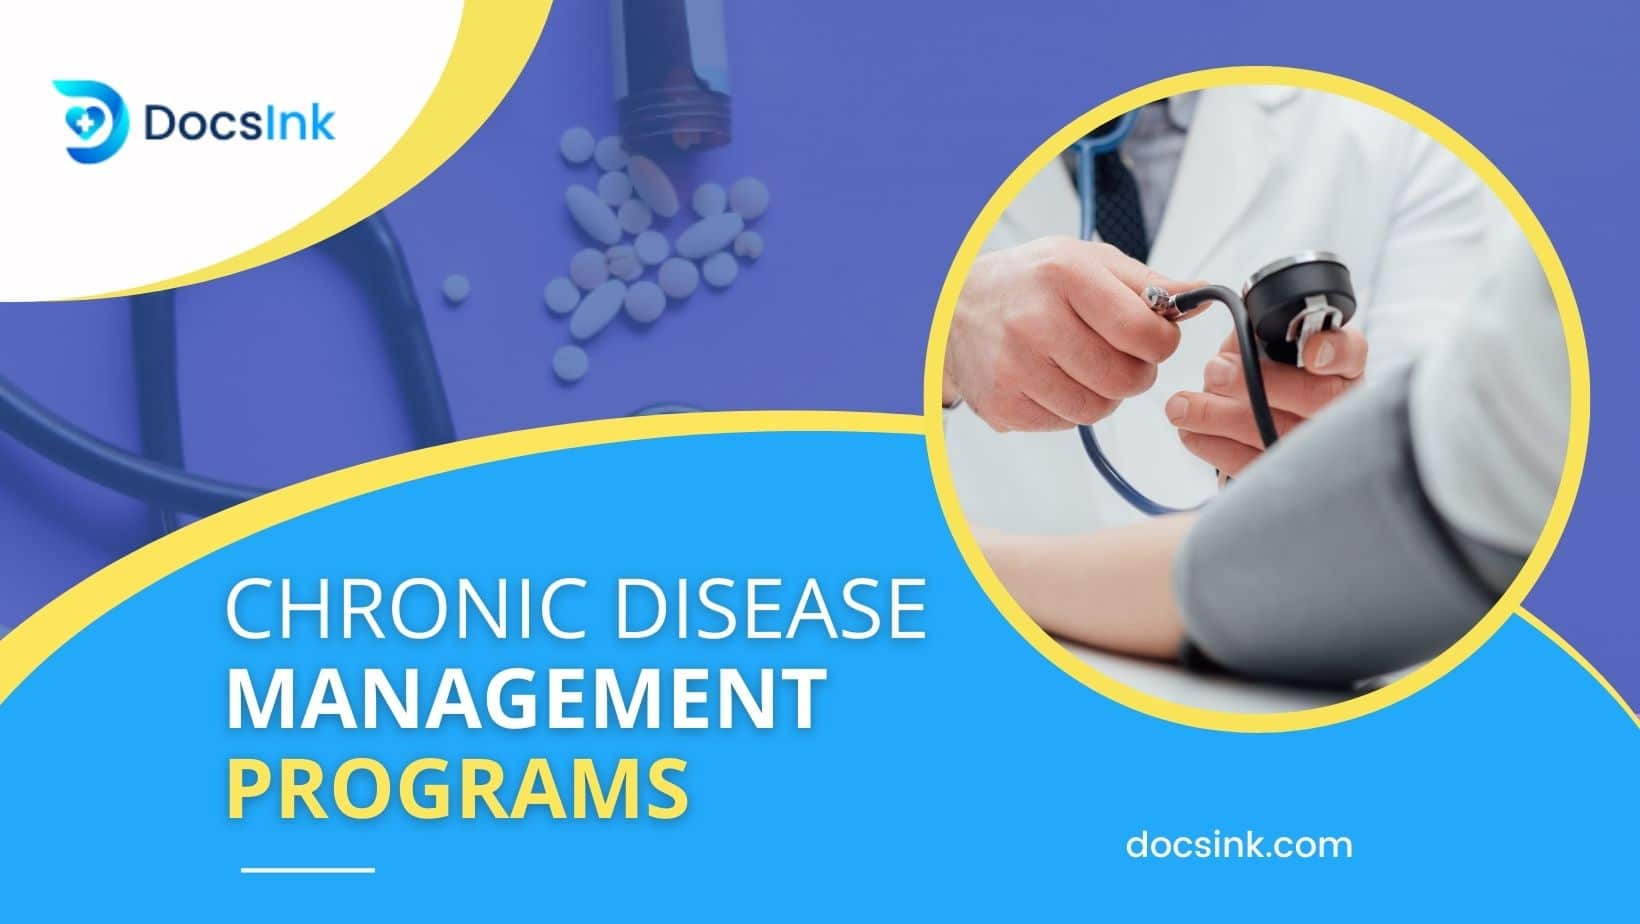 How To Manage Your Chronic Disease